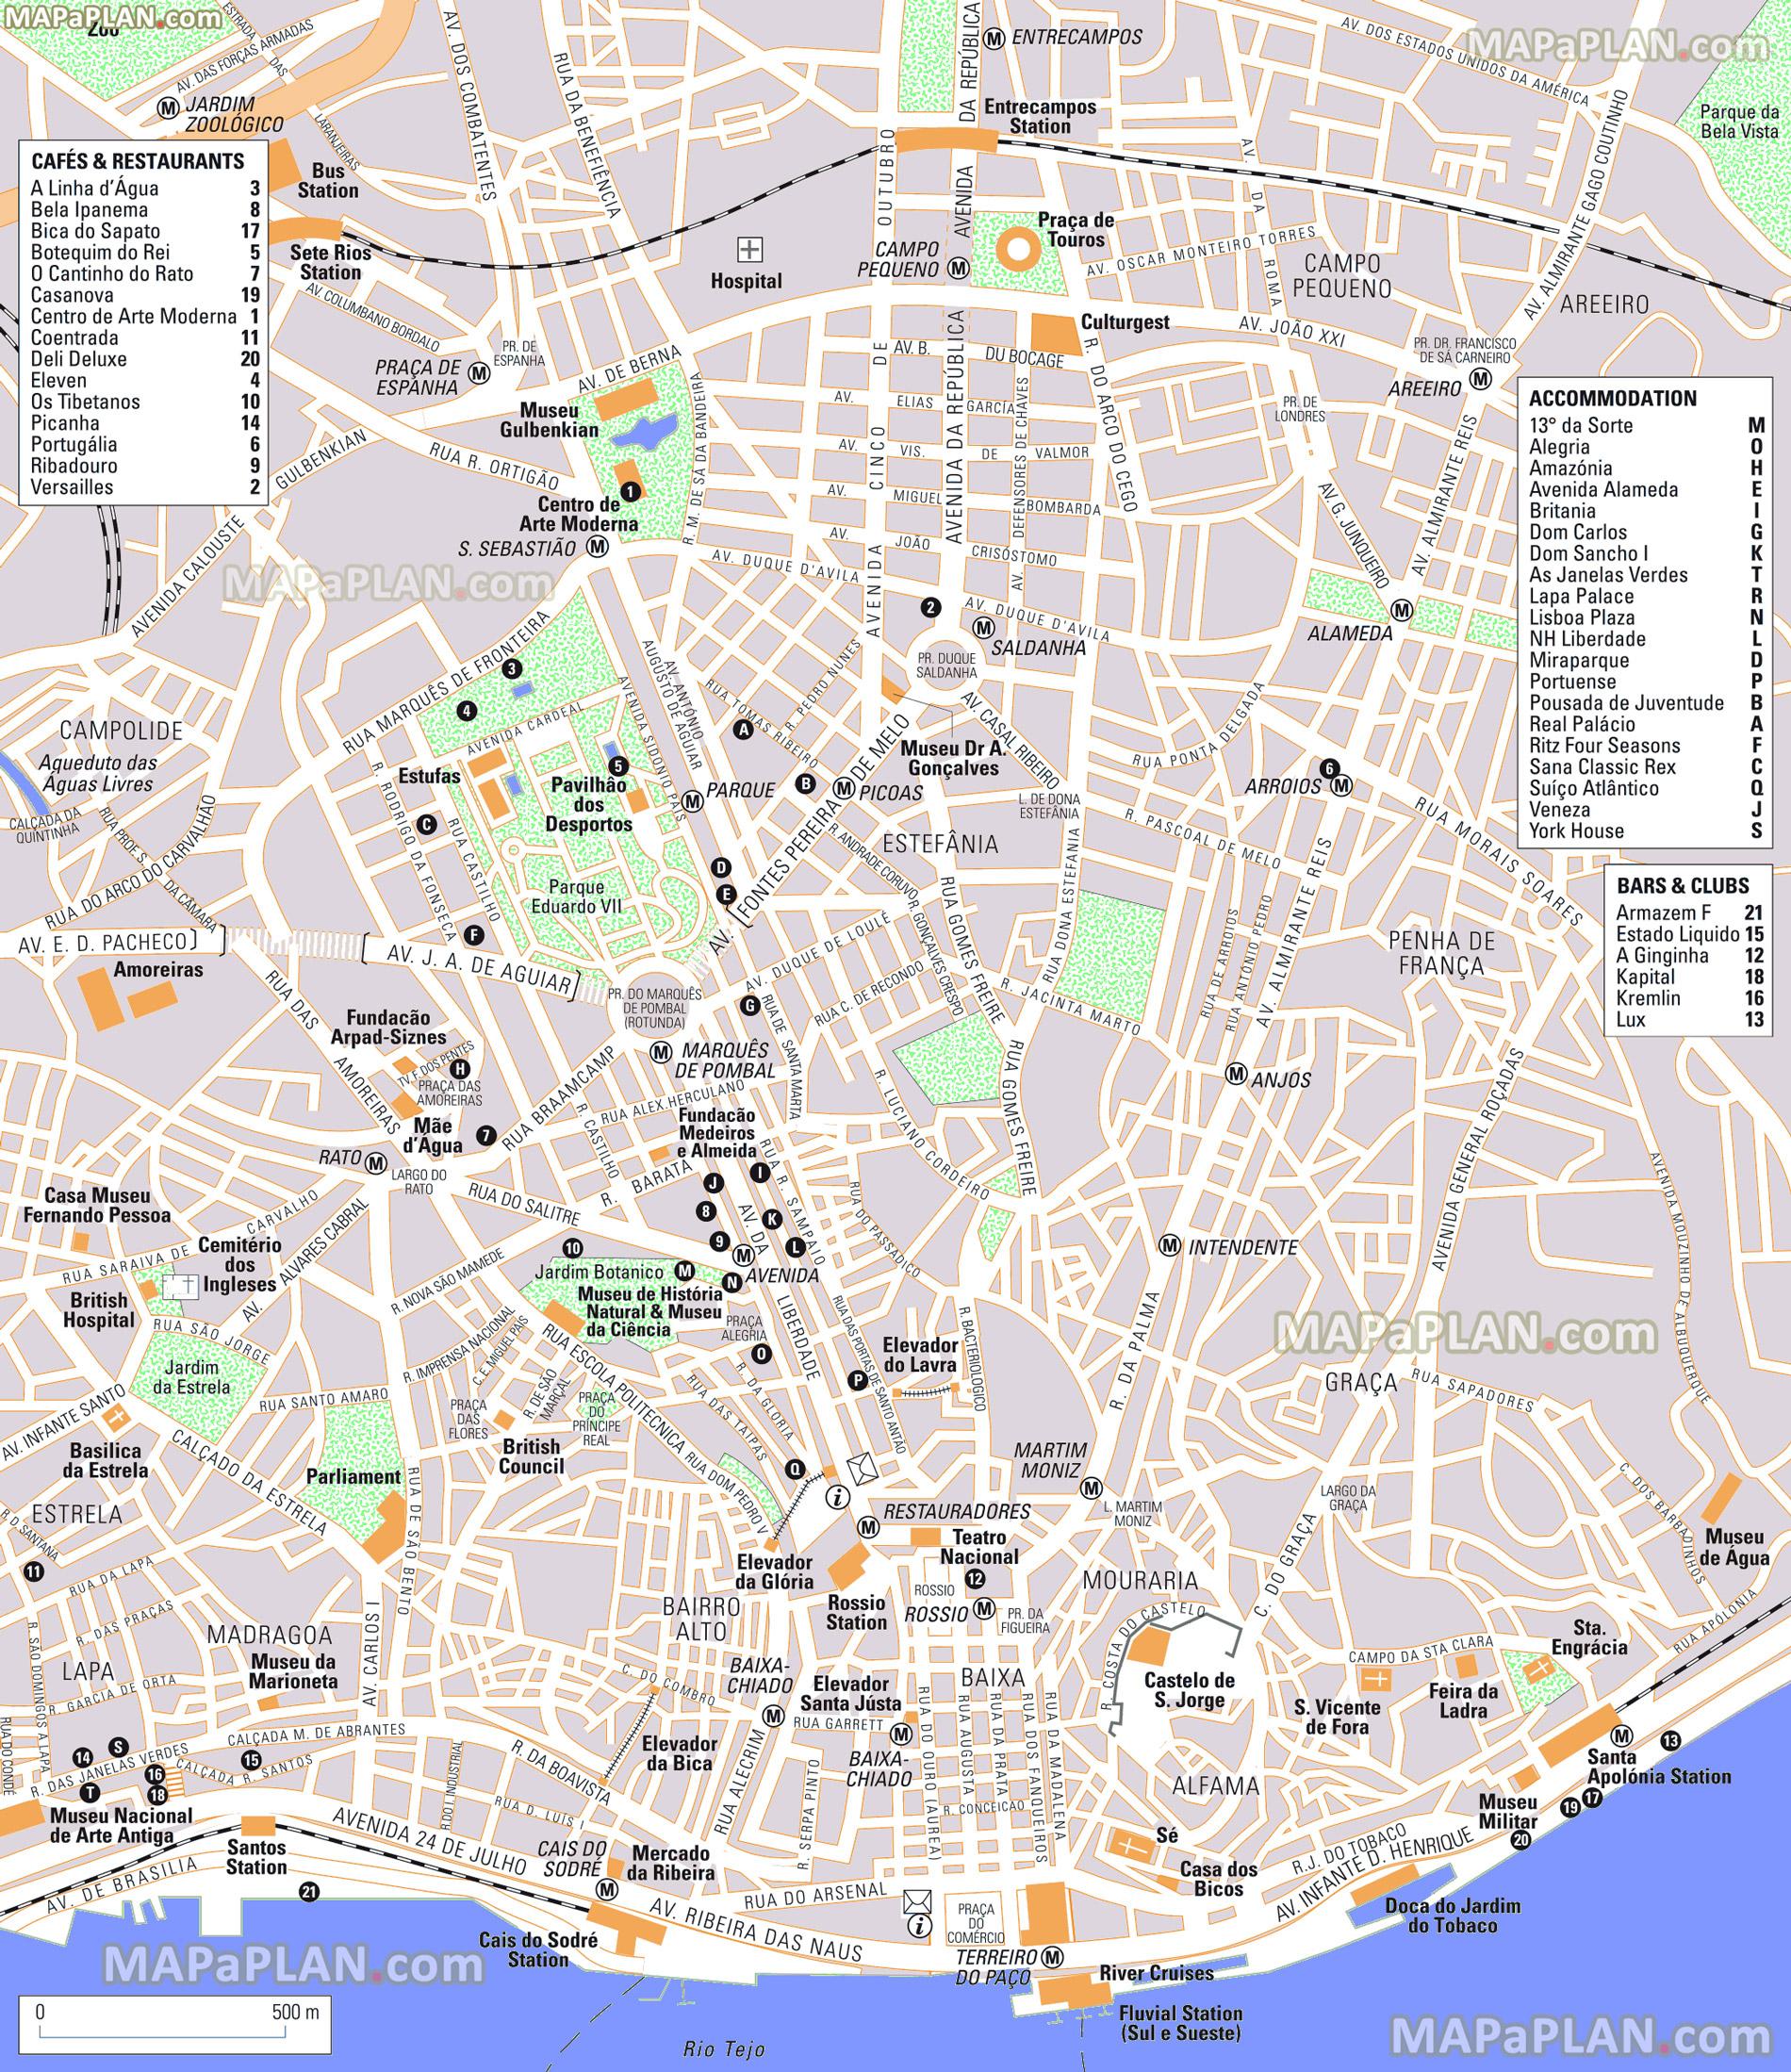 map of lisbon tourist attractions